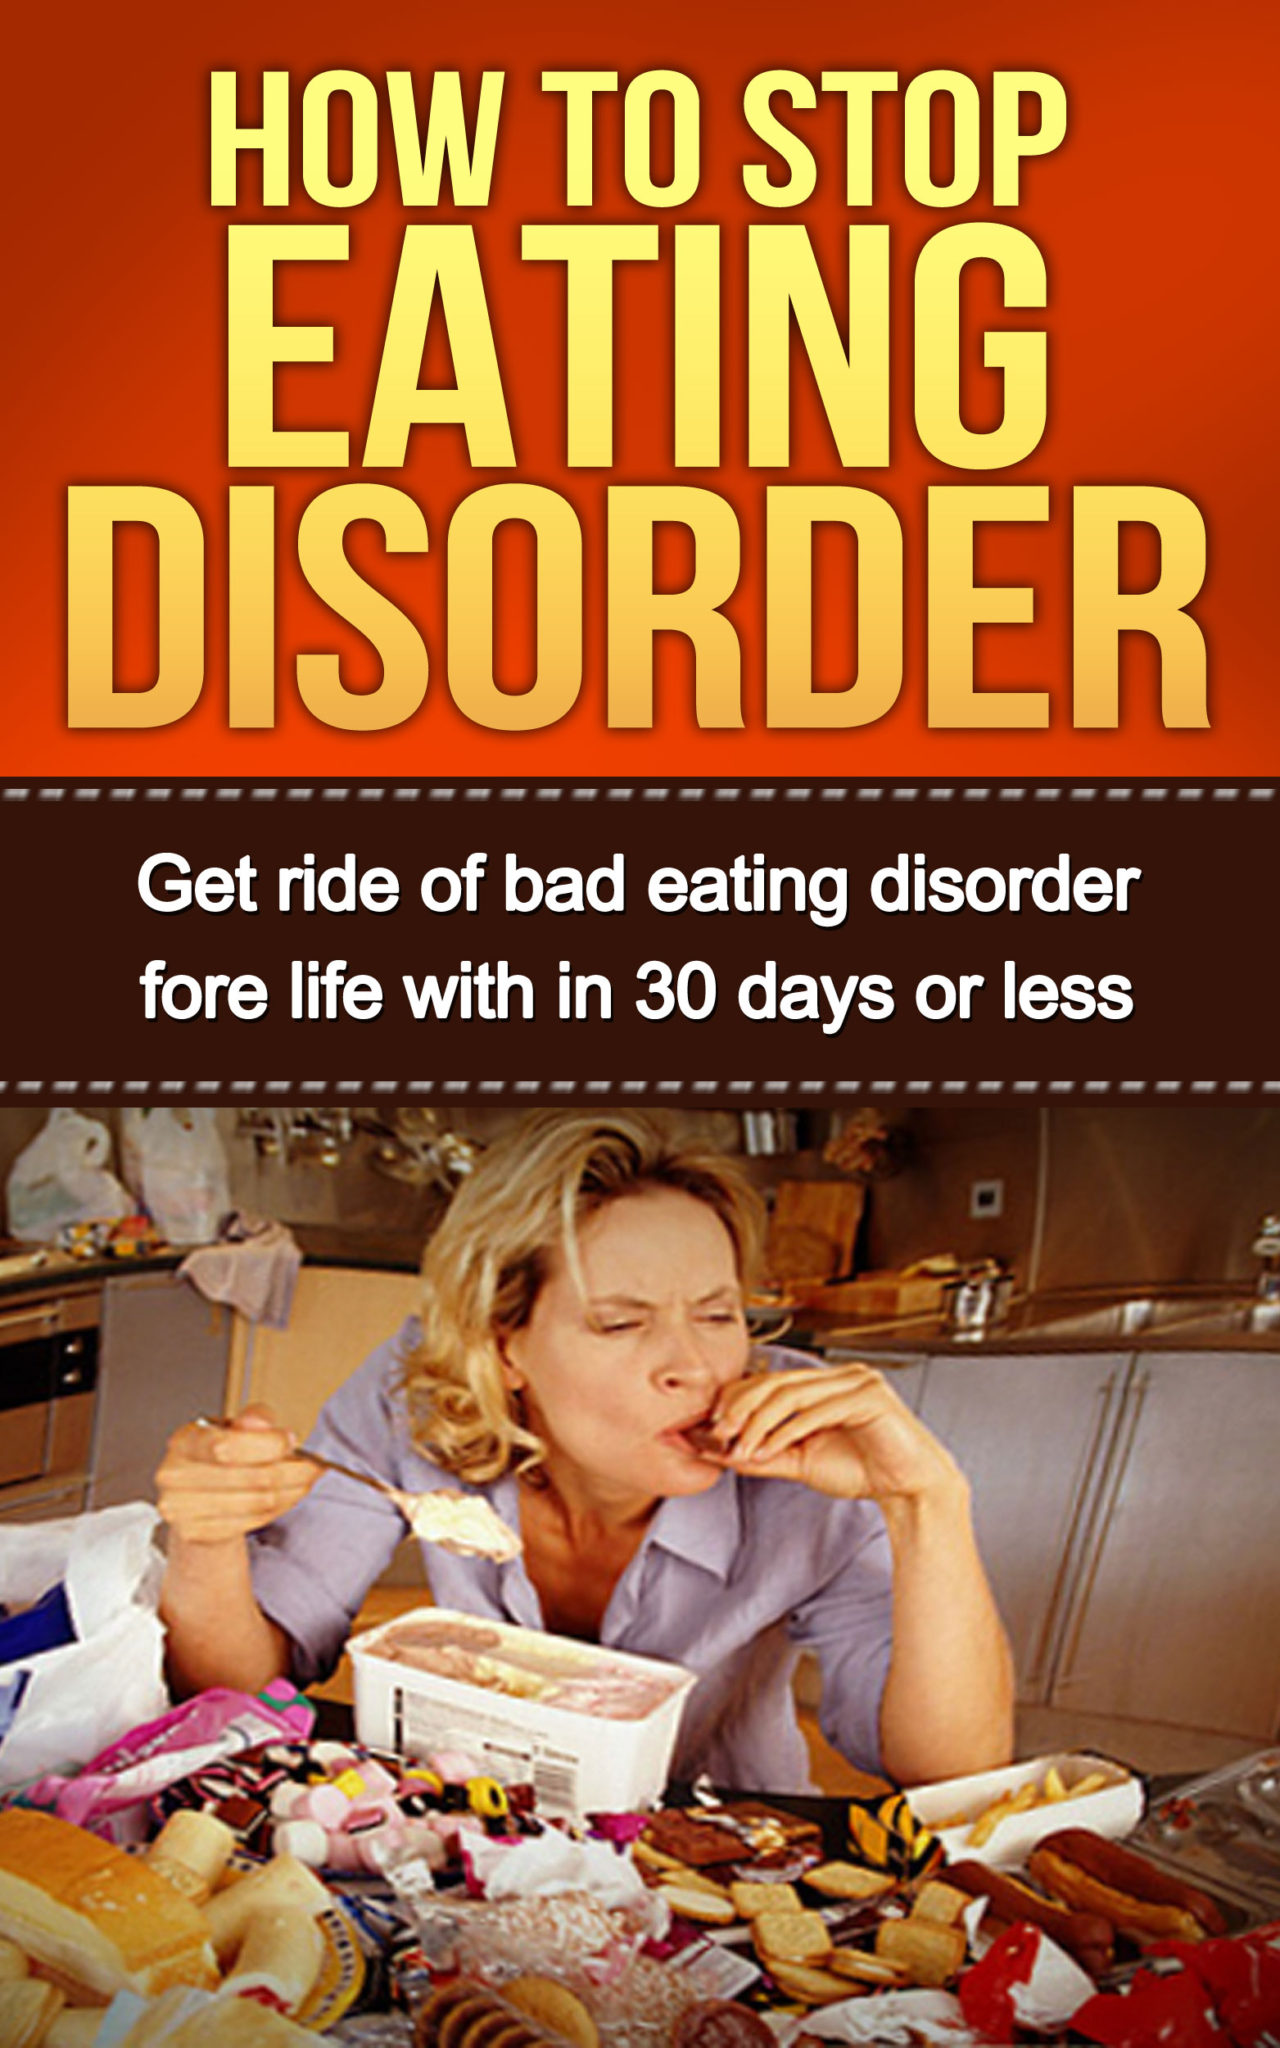 FREE: Eating Disorder – How To Stop Eating Disorder by dr health